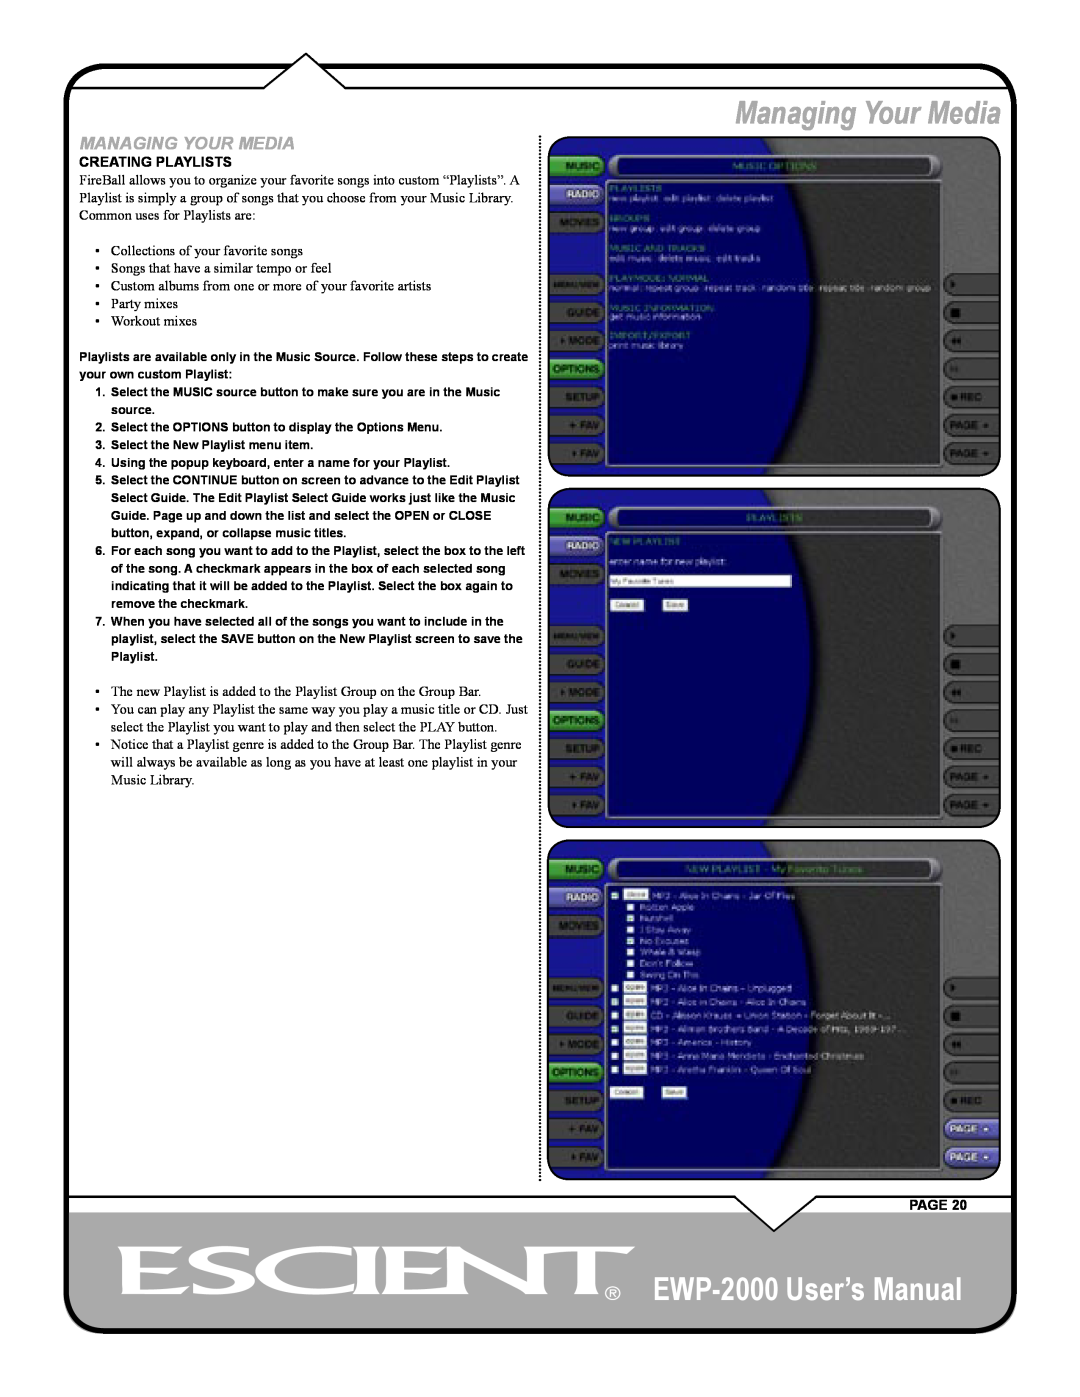 Escient user manual Managing Your Media, EWP-2000 User’s Manual, Creating Playlists, Page 